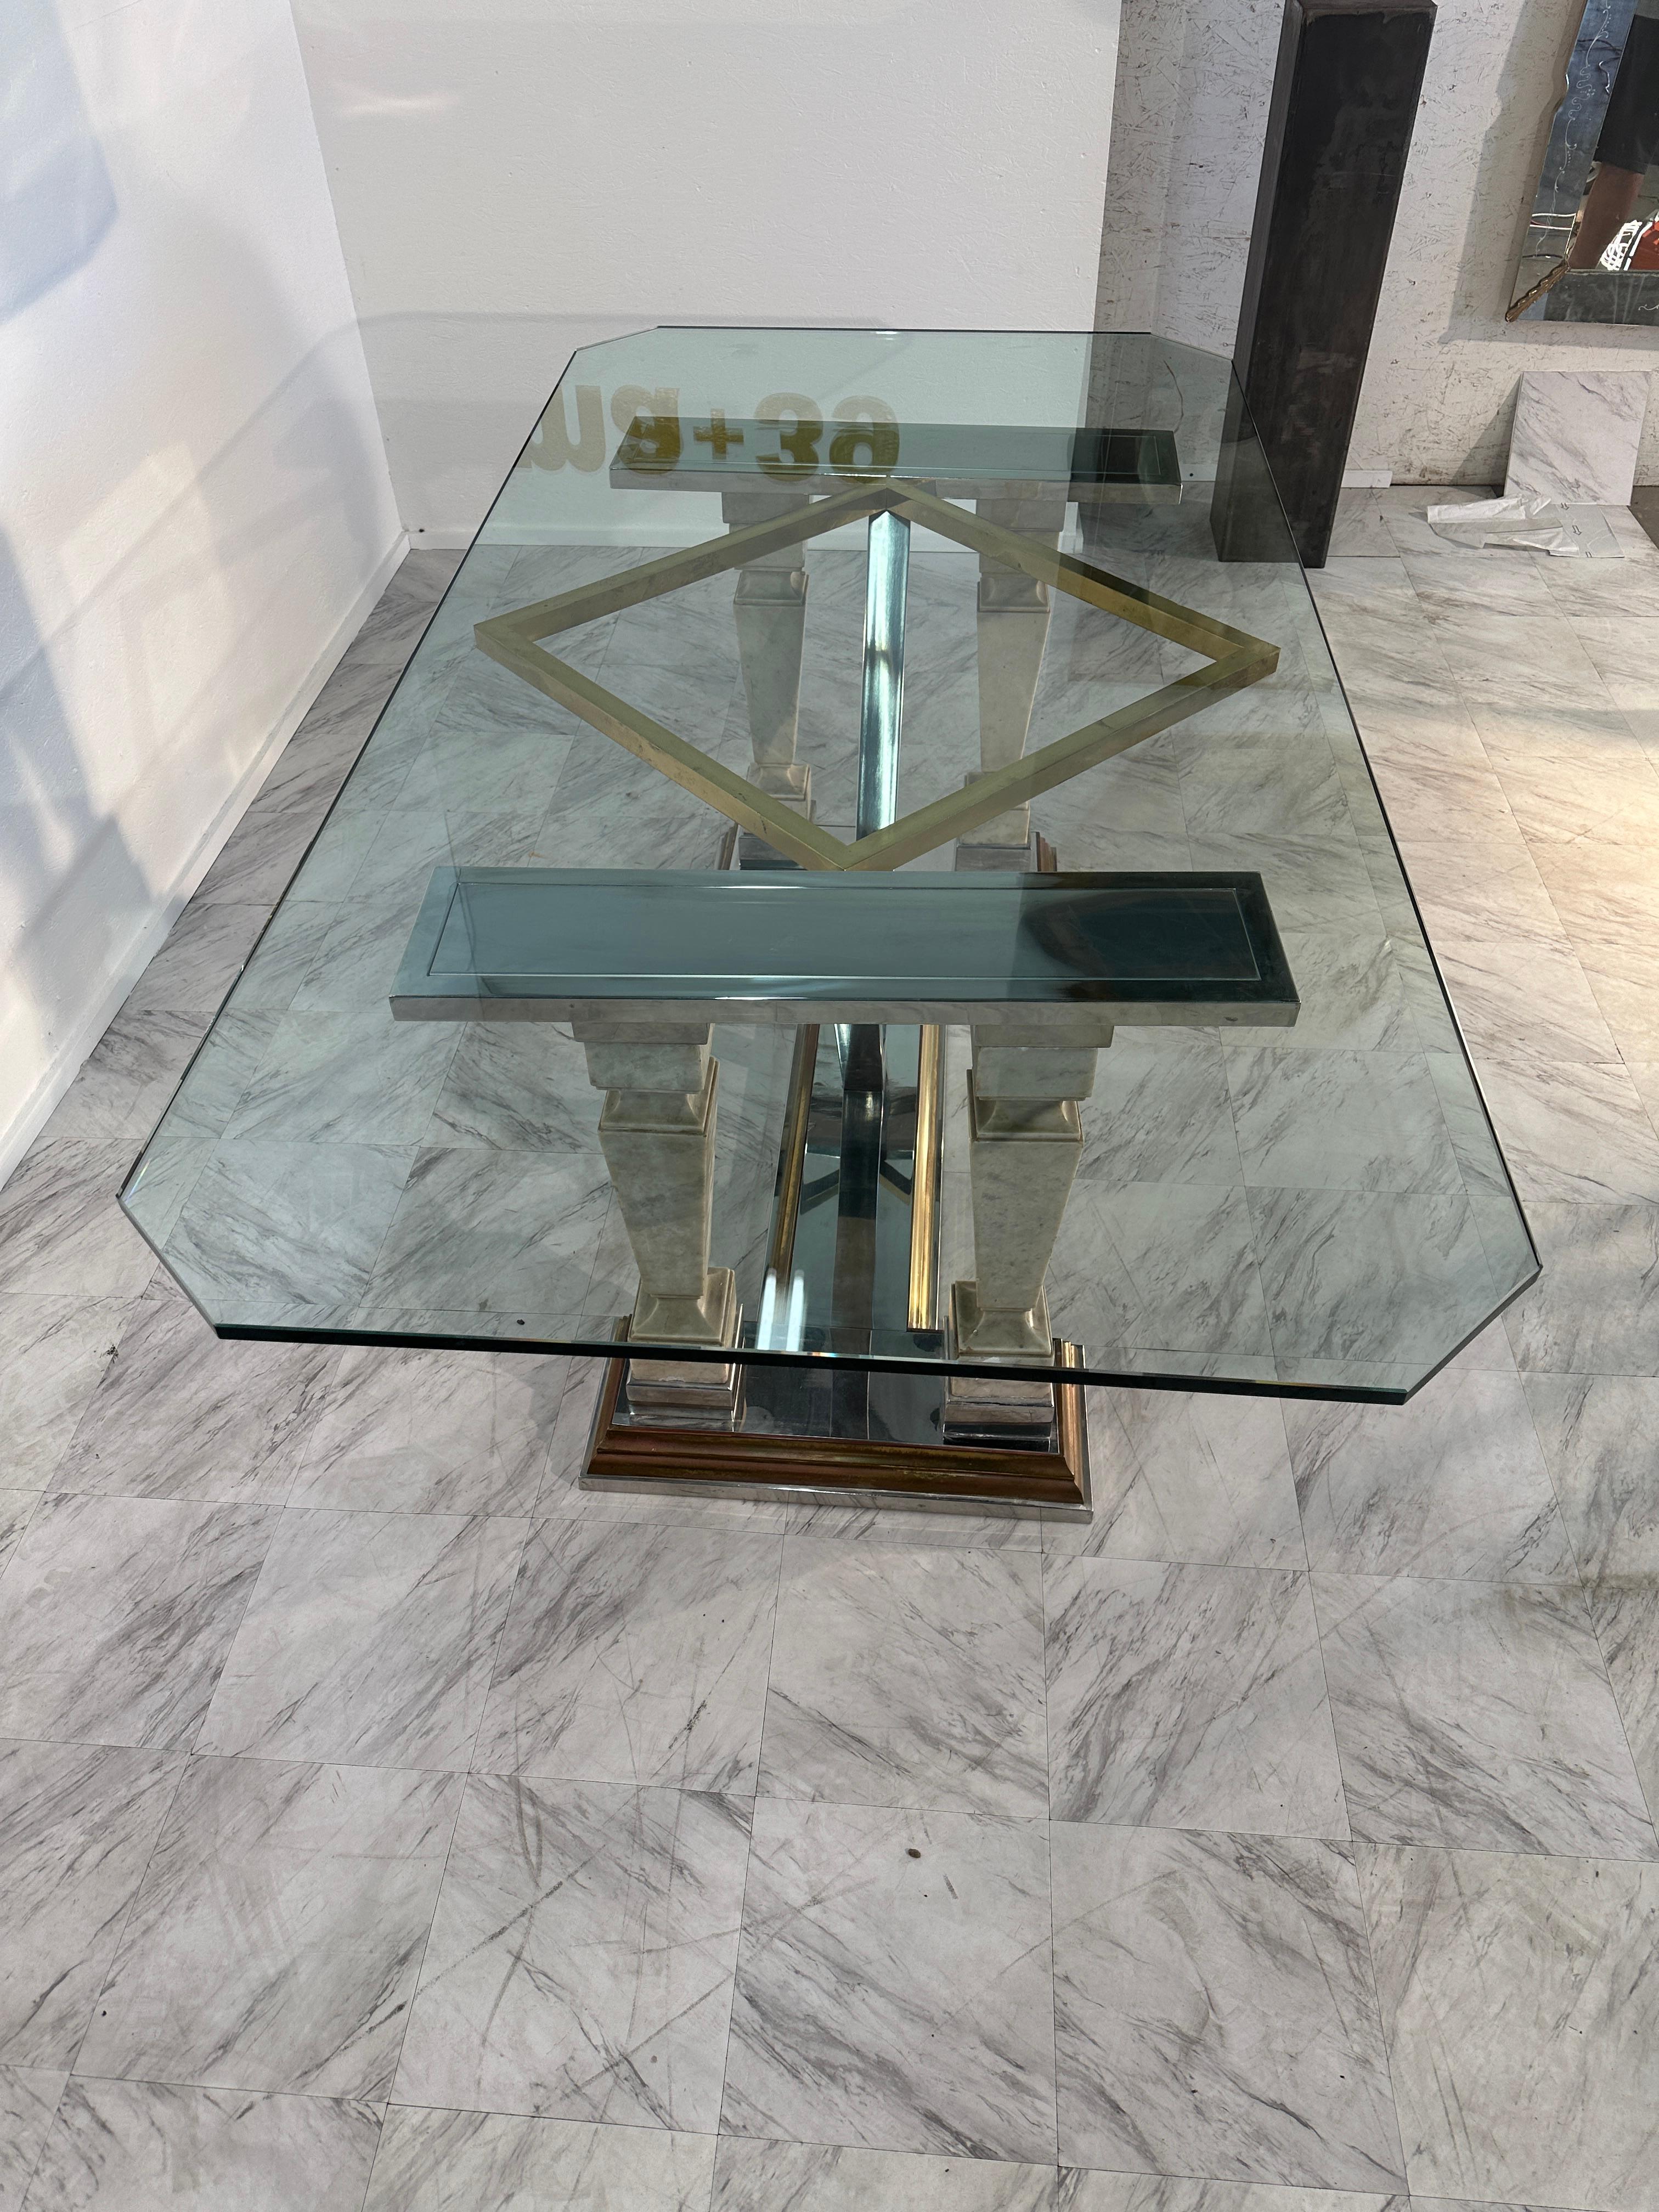 The Mid-Century Modern Sculpted Metal and Marble Dining Table from the 1970s is an elegant piece of furniture known for its sculptural metal base, marble accents, and a glass top. This design embodies the iconic mid-century modern style, combining